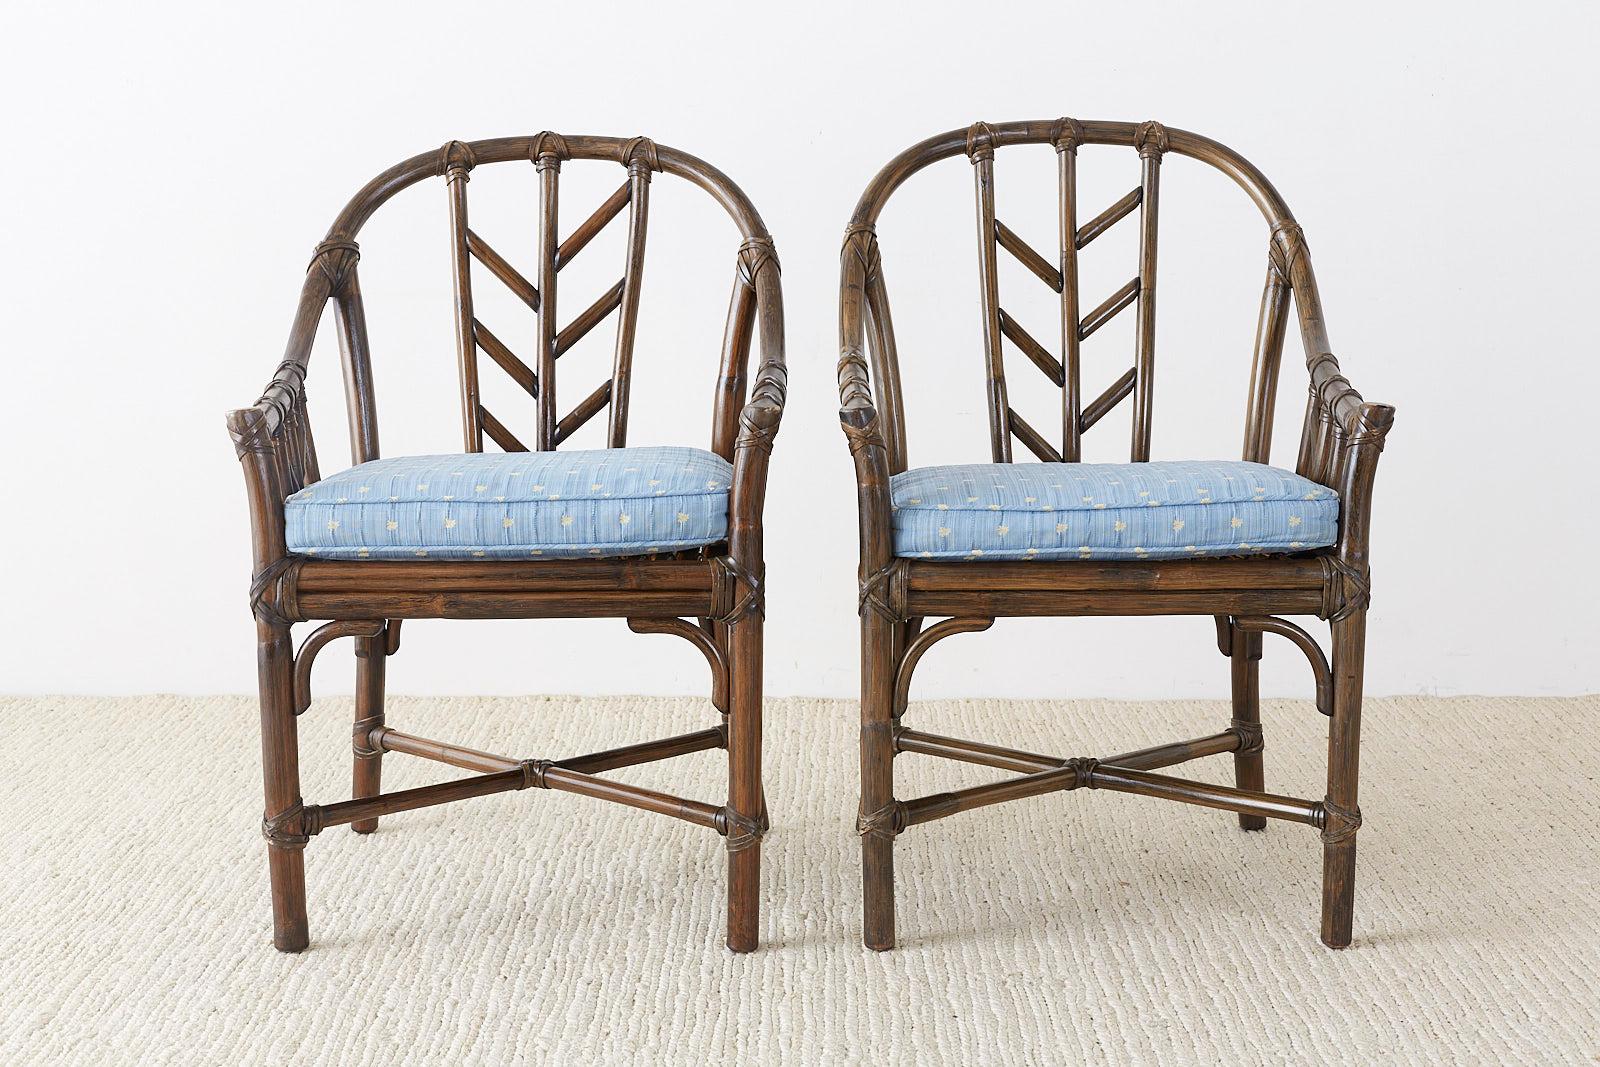 20th Century Set of Four McGuire Organic Modern Rattan Dining Chairs